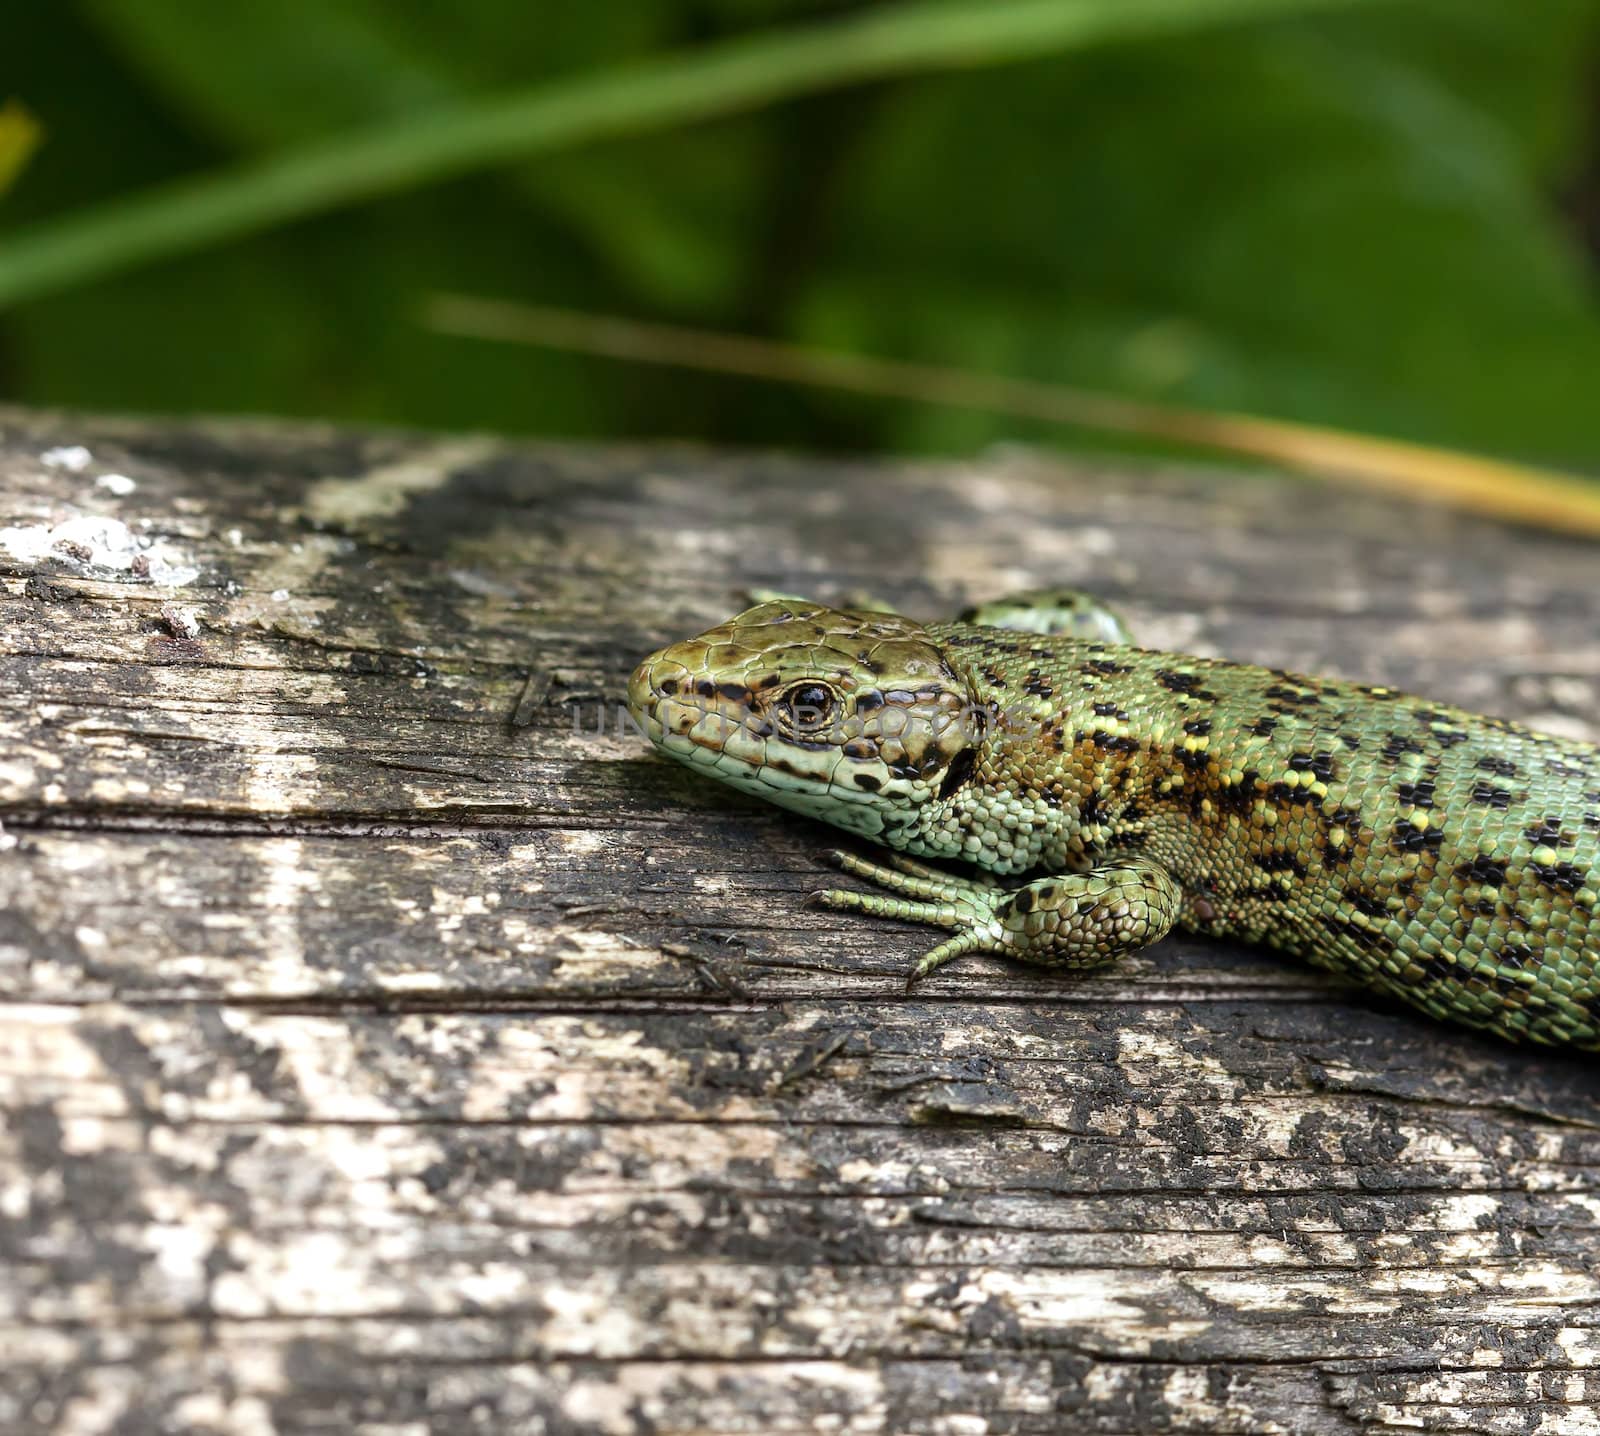 Close-up of Common Lizard, showing scales and claws details.